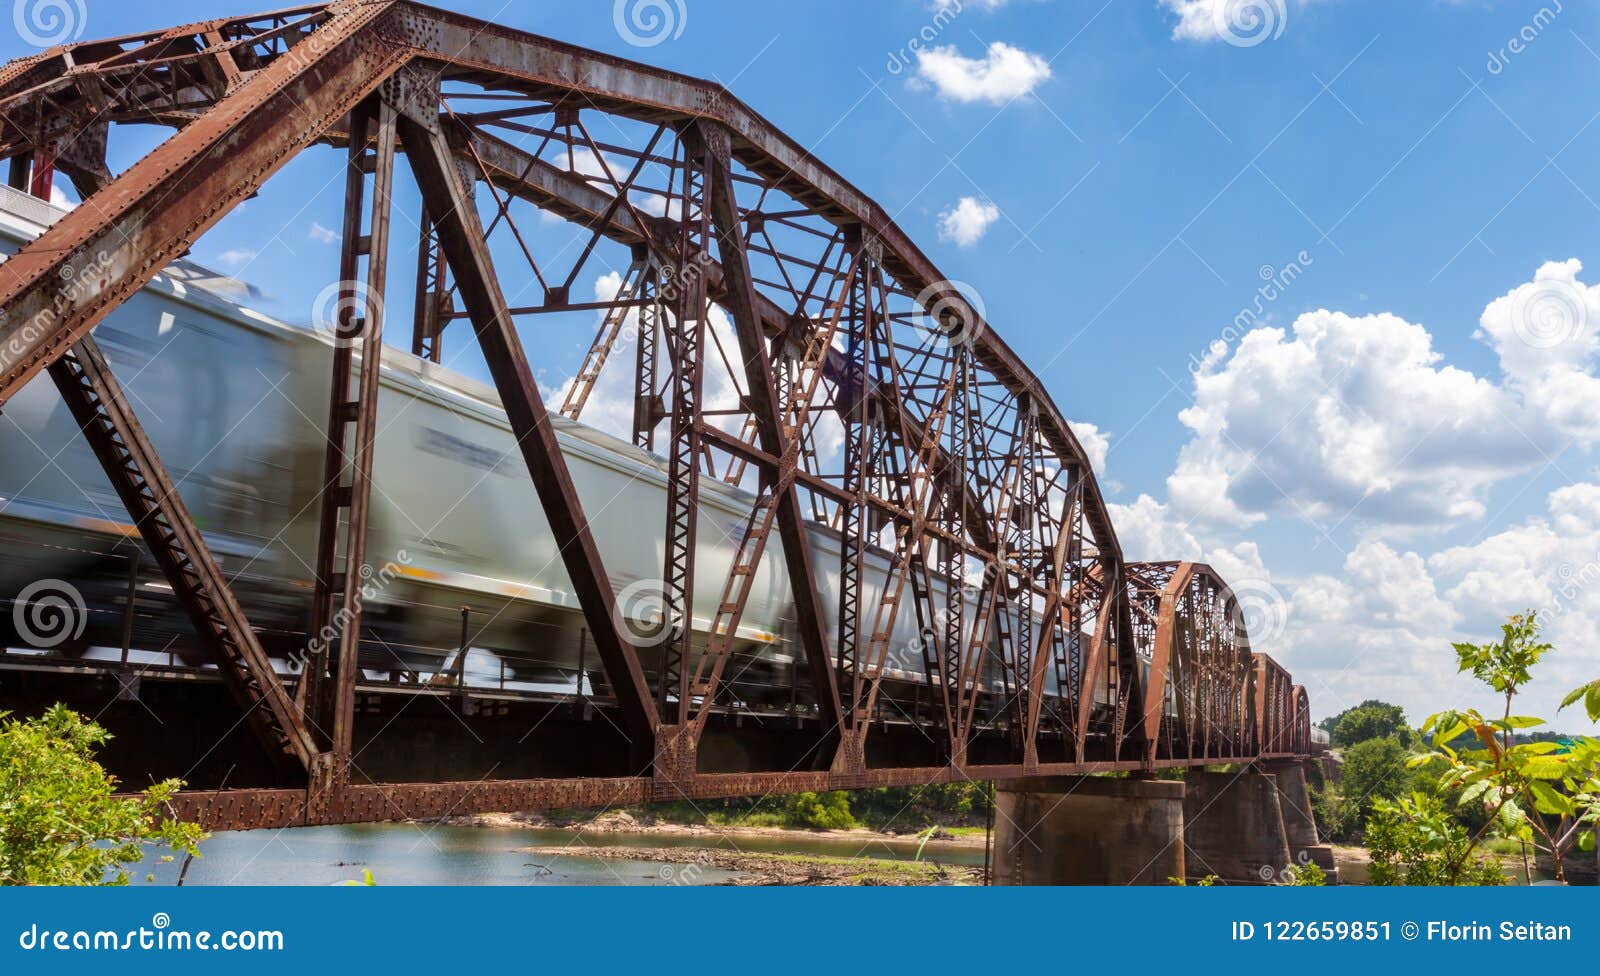 Old Rusty Truss Bridge With Moving Freight Train Over The Red Ri Stock Image Image Of Heavy Railway